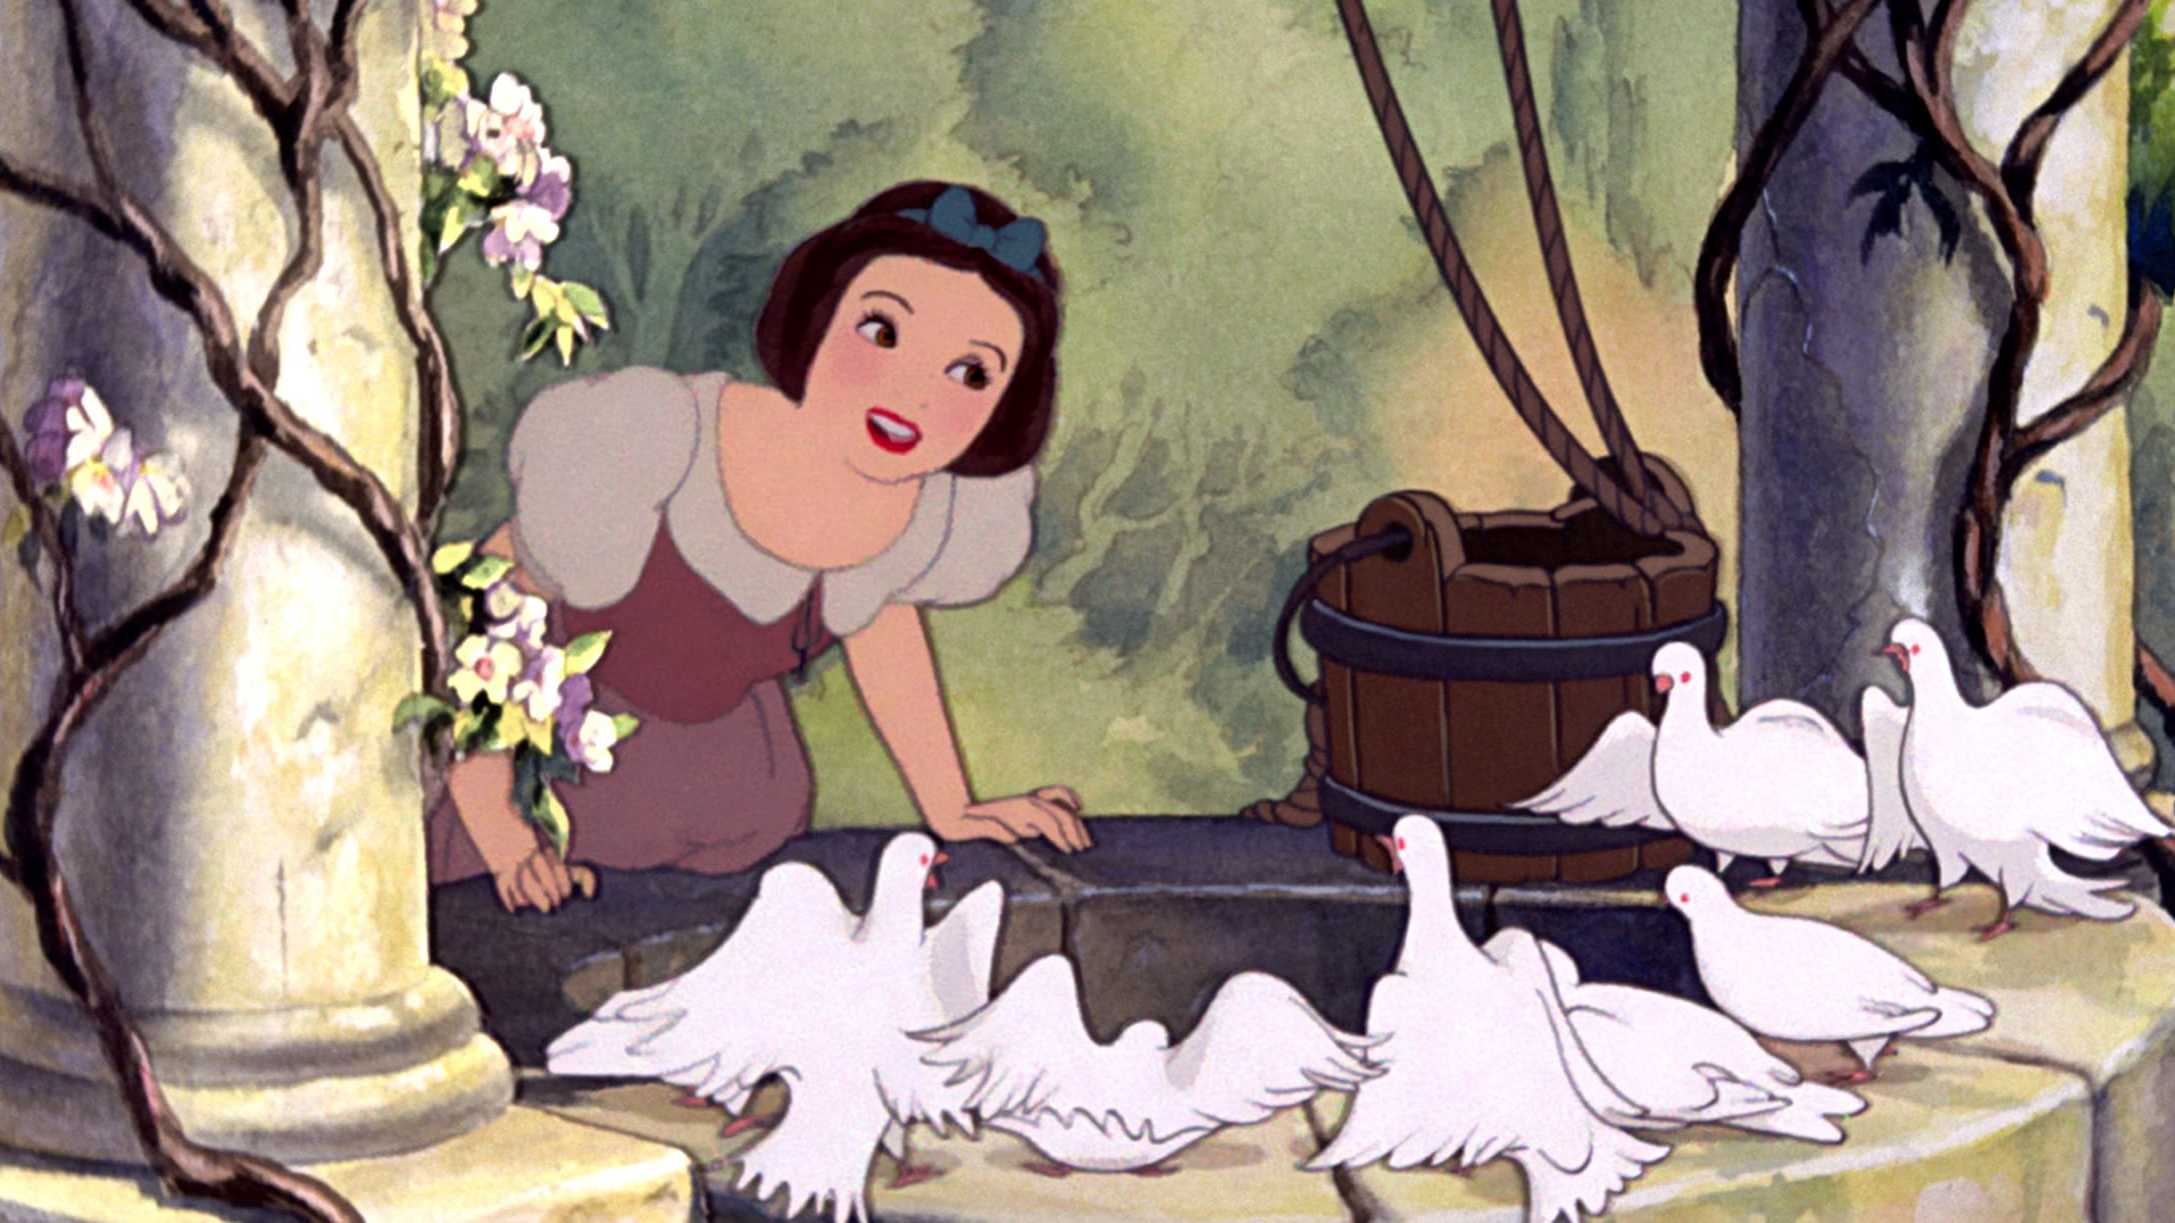 Snow White standing by a wishing well with her animal friends.